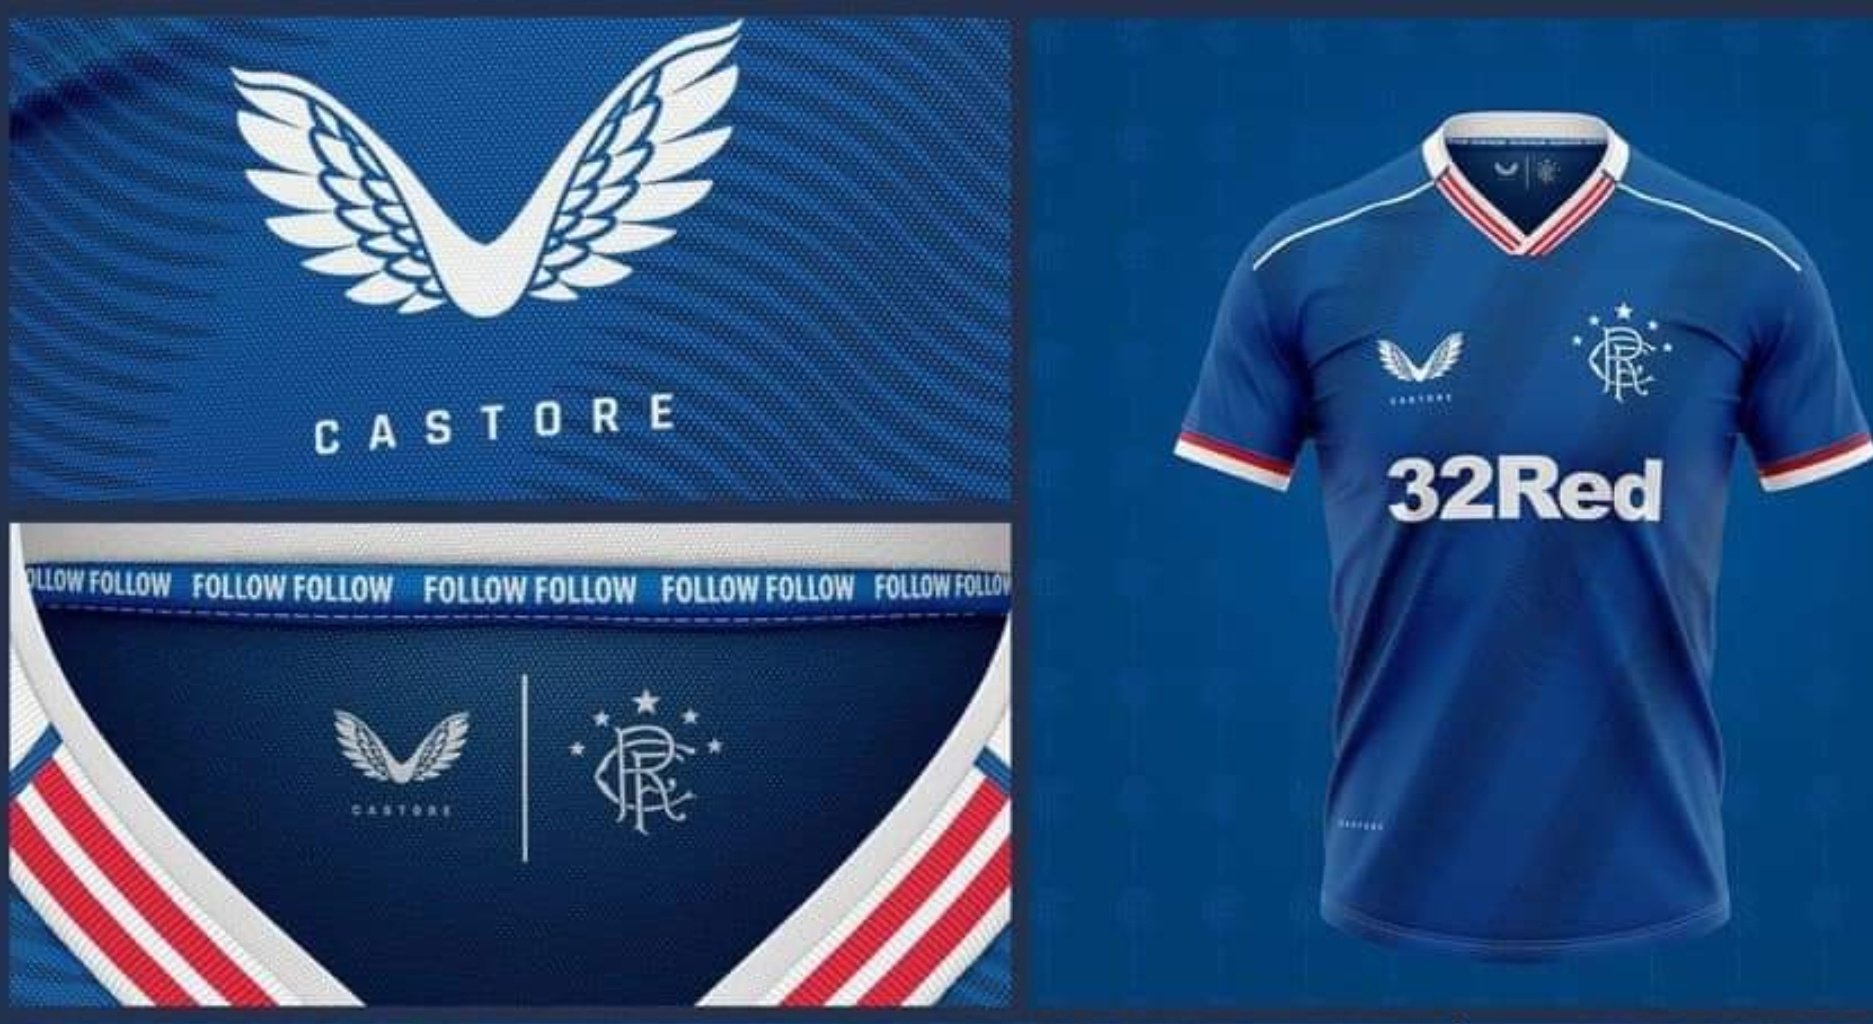 Rangers players caught on cam modeling new Castore home kit at Ibrox